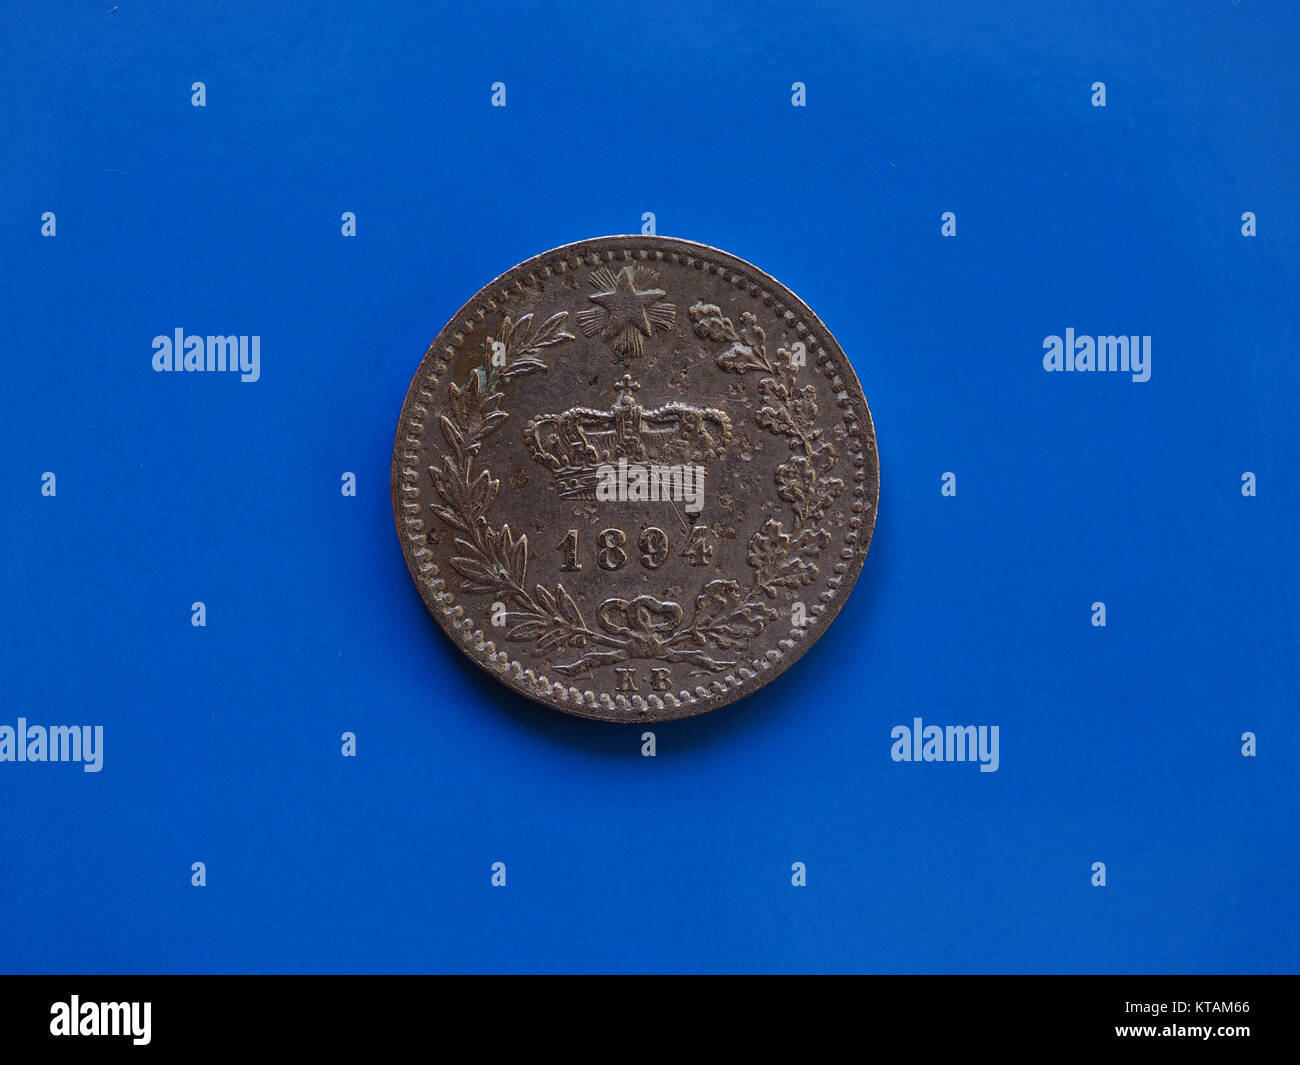 20 cents coin, Kingdom of Italy over blue Stock Photo